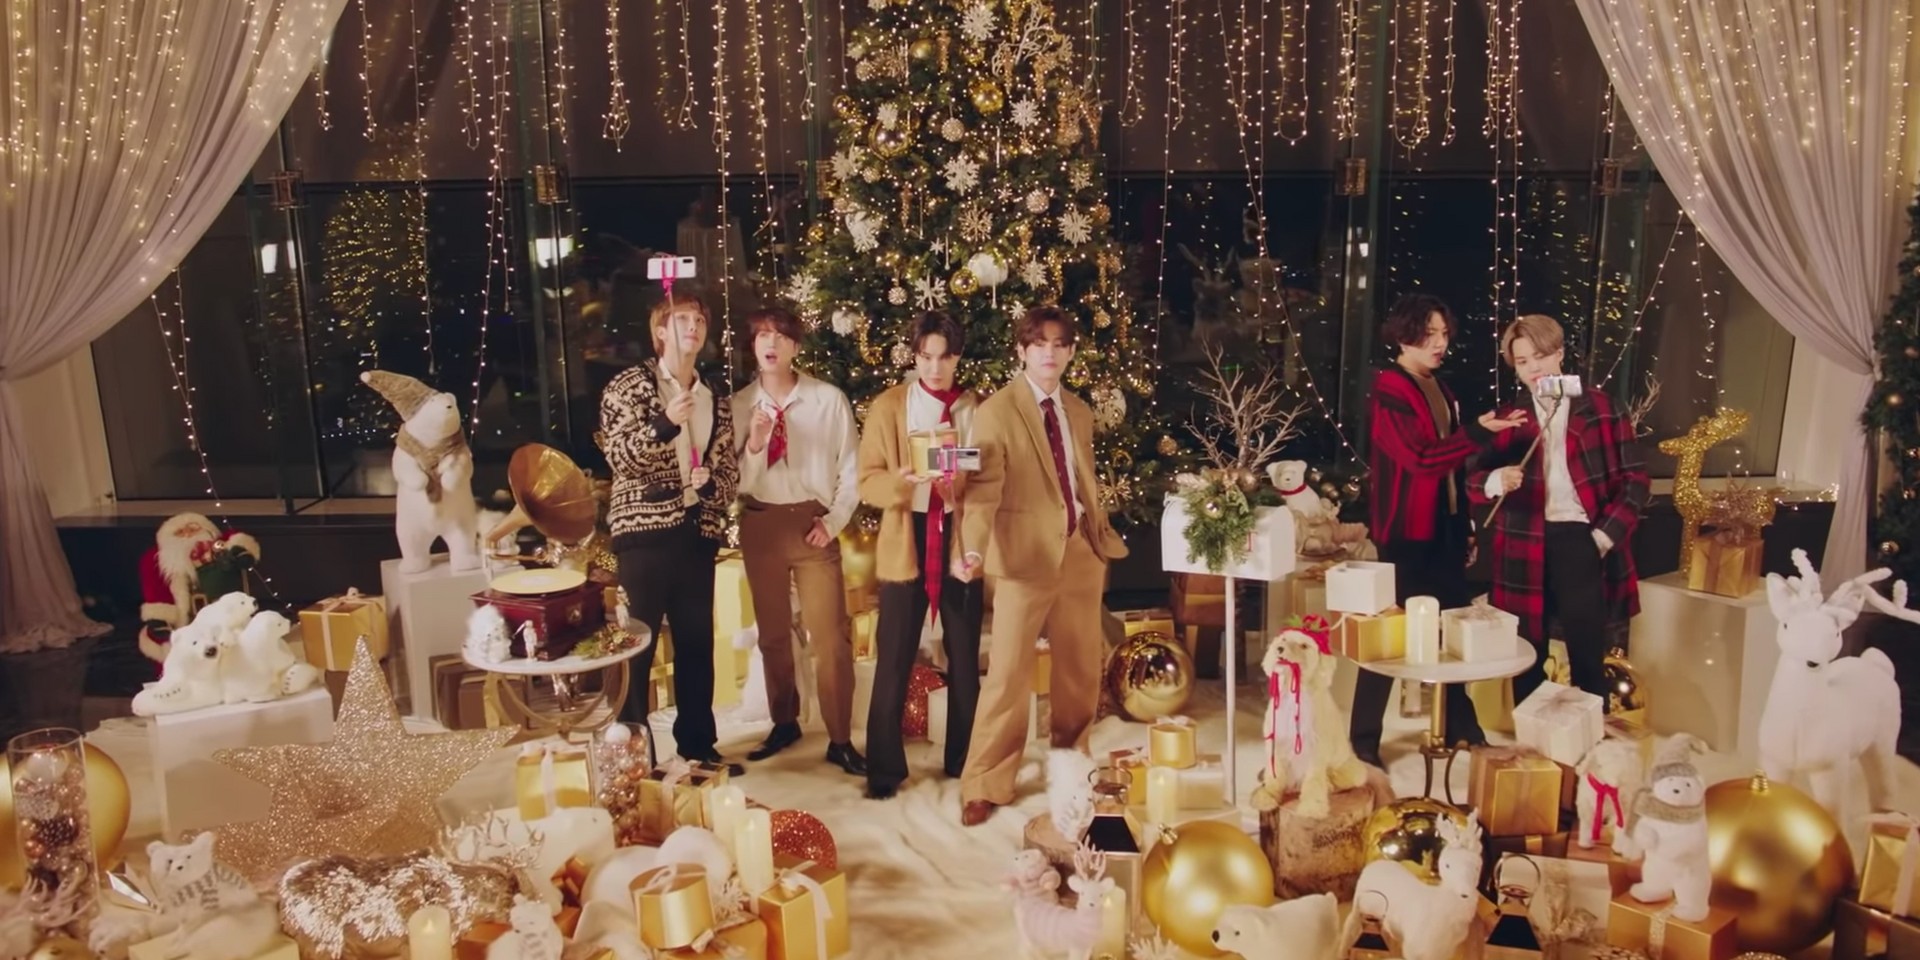 BTS gift fans with Holiday Remix of Grammy-nominated hit 'Dynamite' "to return some of the amazing love" – watch